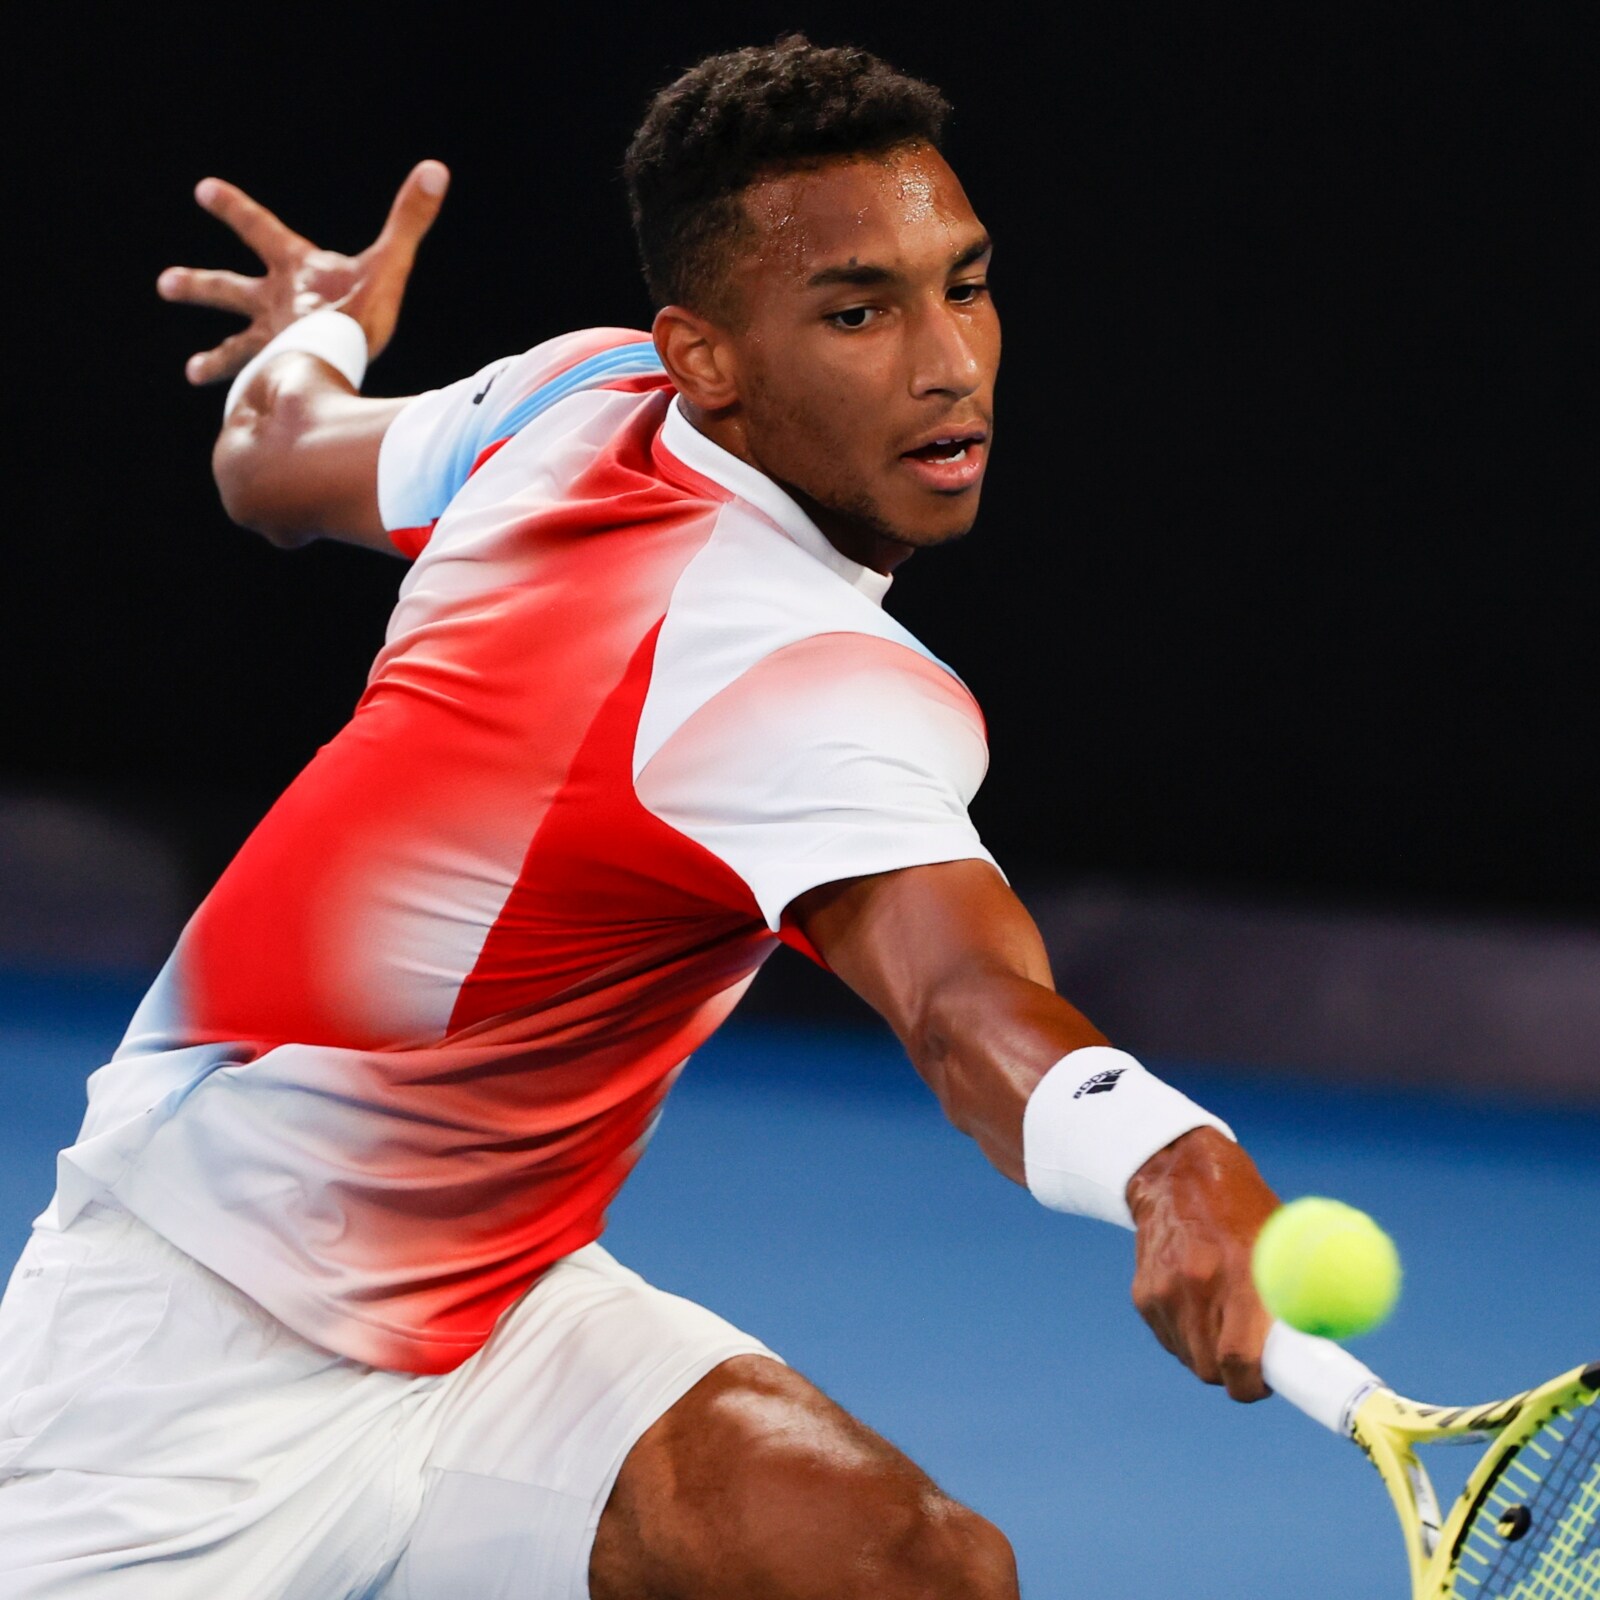 Australian Open Auger-Aliassime Ready for the World After Insane Quarter-final Epic